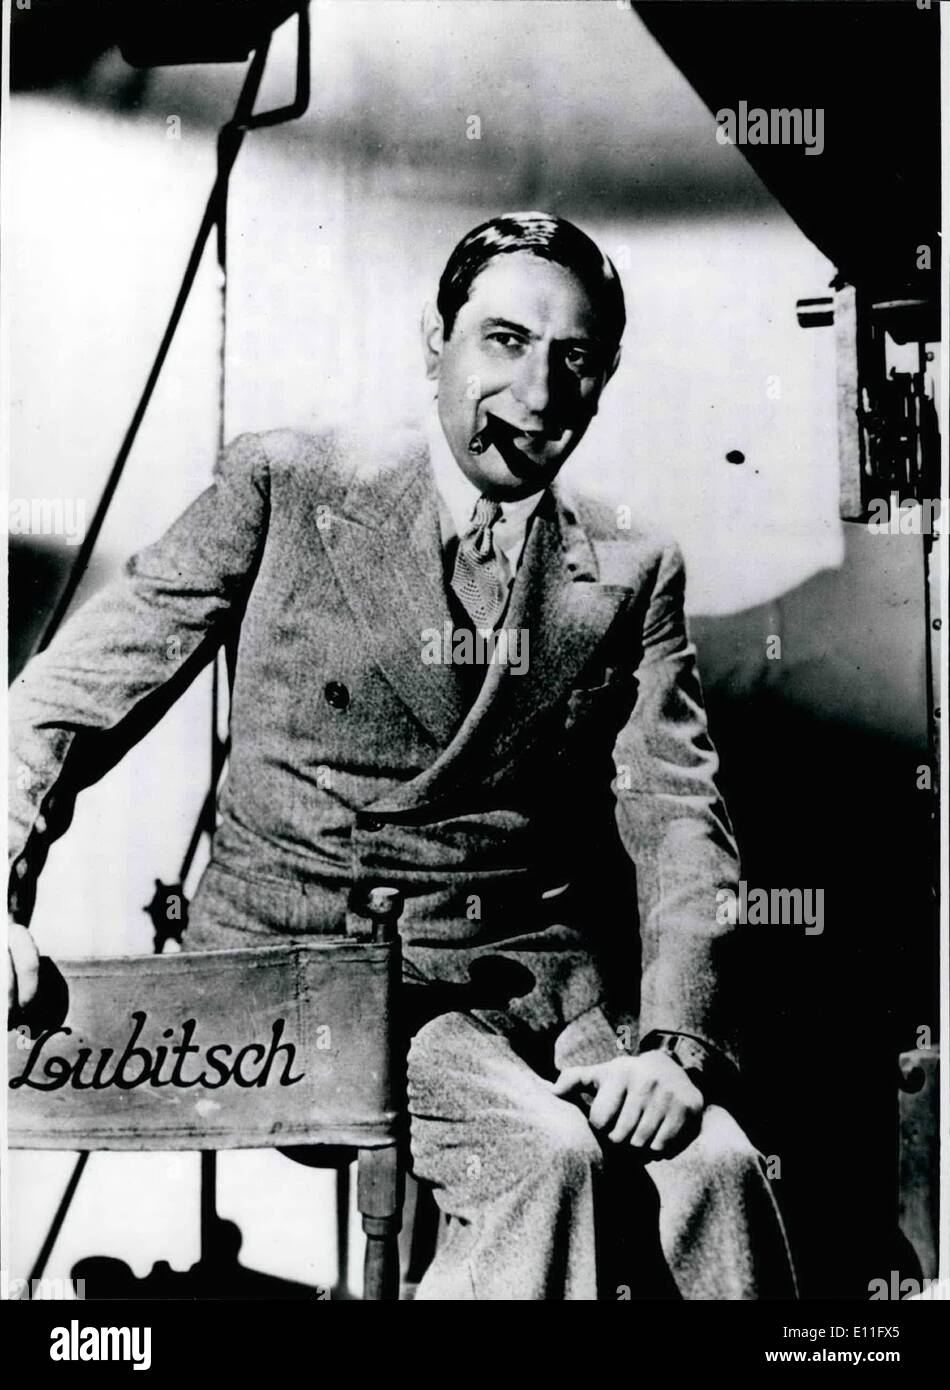 Nov. 11, 1977 - 30th ANNIVERSARY OF DEATH OF ERNST LUBITSCH 30 years ago, on November 3oth, 1947, in o  y... died the famous director ERNST LUBITSCH (our picture). 1982 born in Berlin, he was discovered in 1911 by Max Reinhardt and educated by him, - a short time later ho had played in films. 1914 he directed for the first time, 1919 he had his first great success with the comedy ''Die Austernprinzessin'' (The oyster-princess) and the historical film ''Madame Dubarry'' Stock Photo